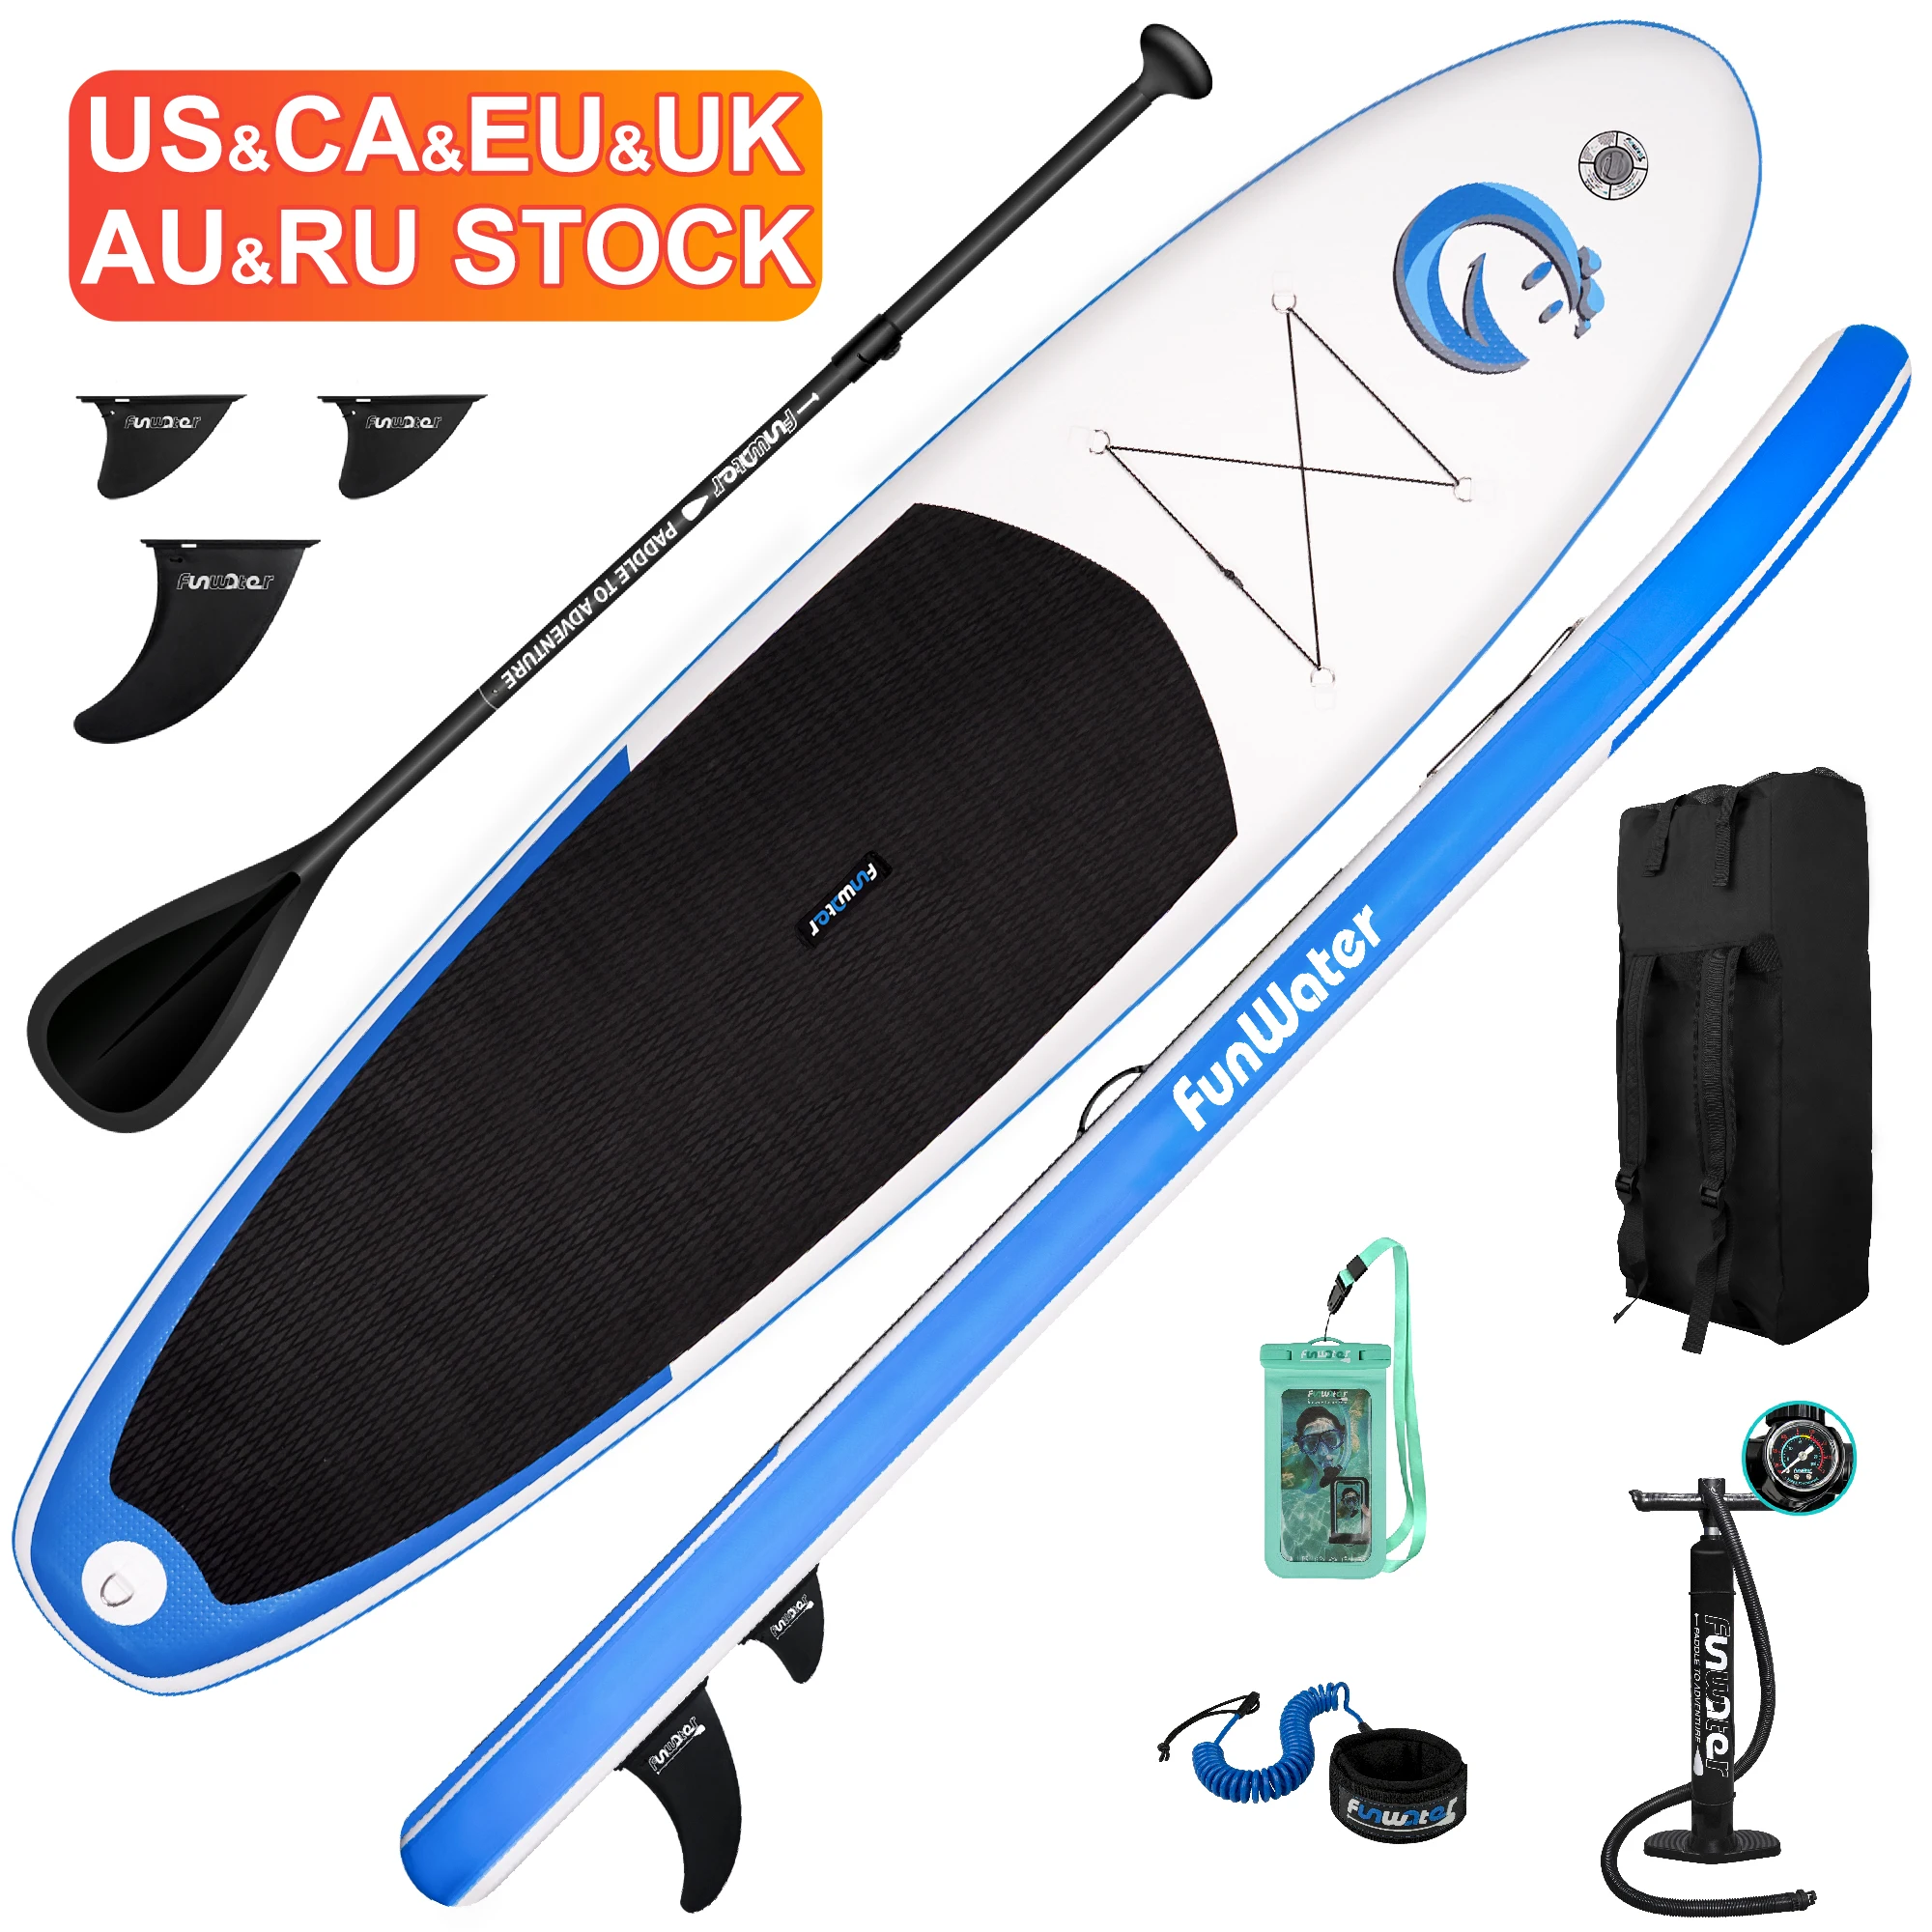 

FUNWATER Dropshipping OEM 11' blue Inflatable Stand Up Paddle Surf Board SUP PaddleBoarding wholesale wakeboard water sports